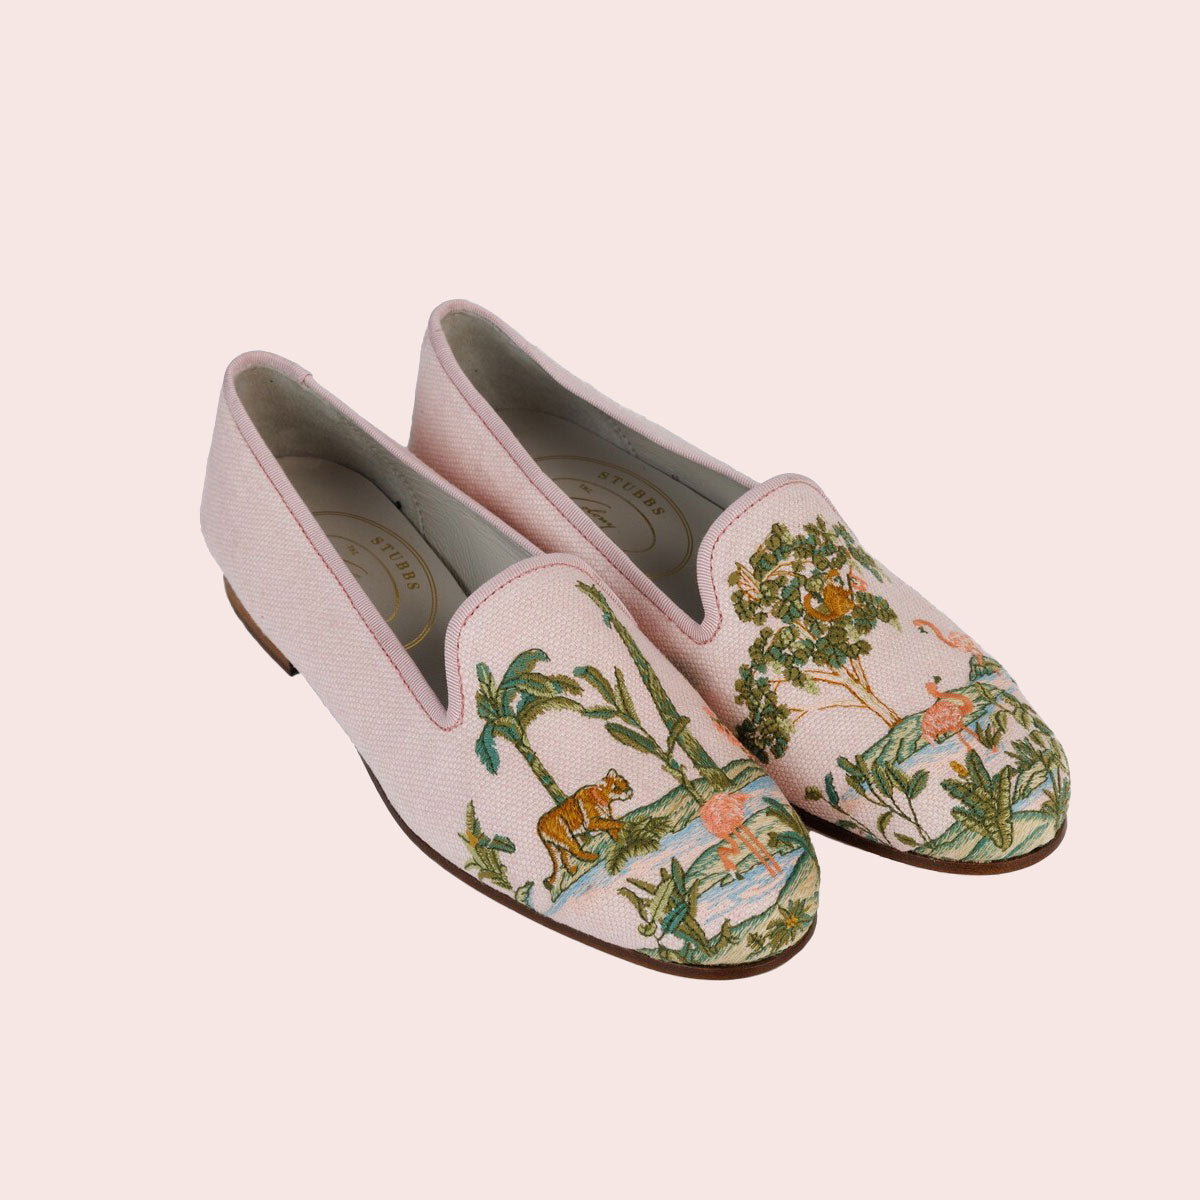 WOMEN'S COLONY X STUBBS & WOOTTON LOAFERS